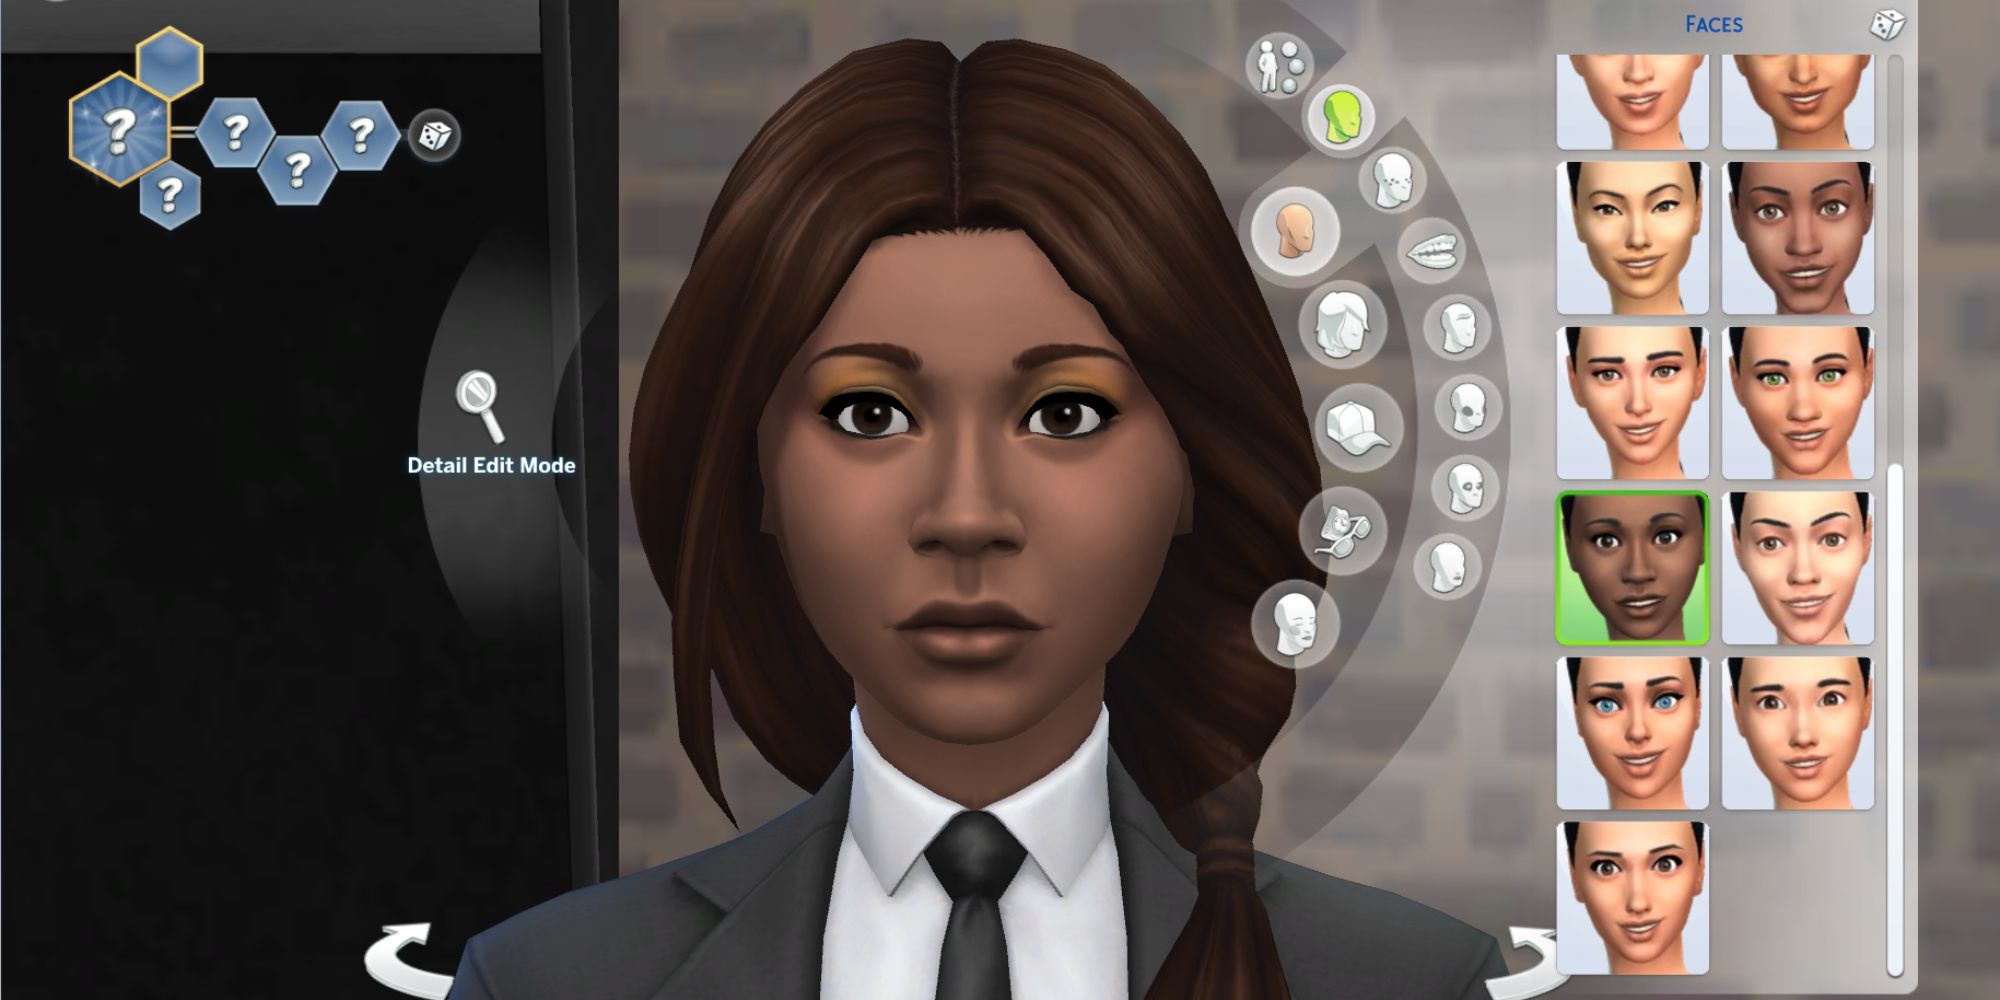 Use presets to create more unique looking Sims and break same-face syndrome habits